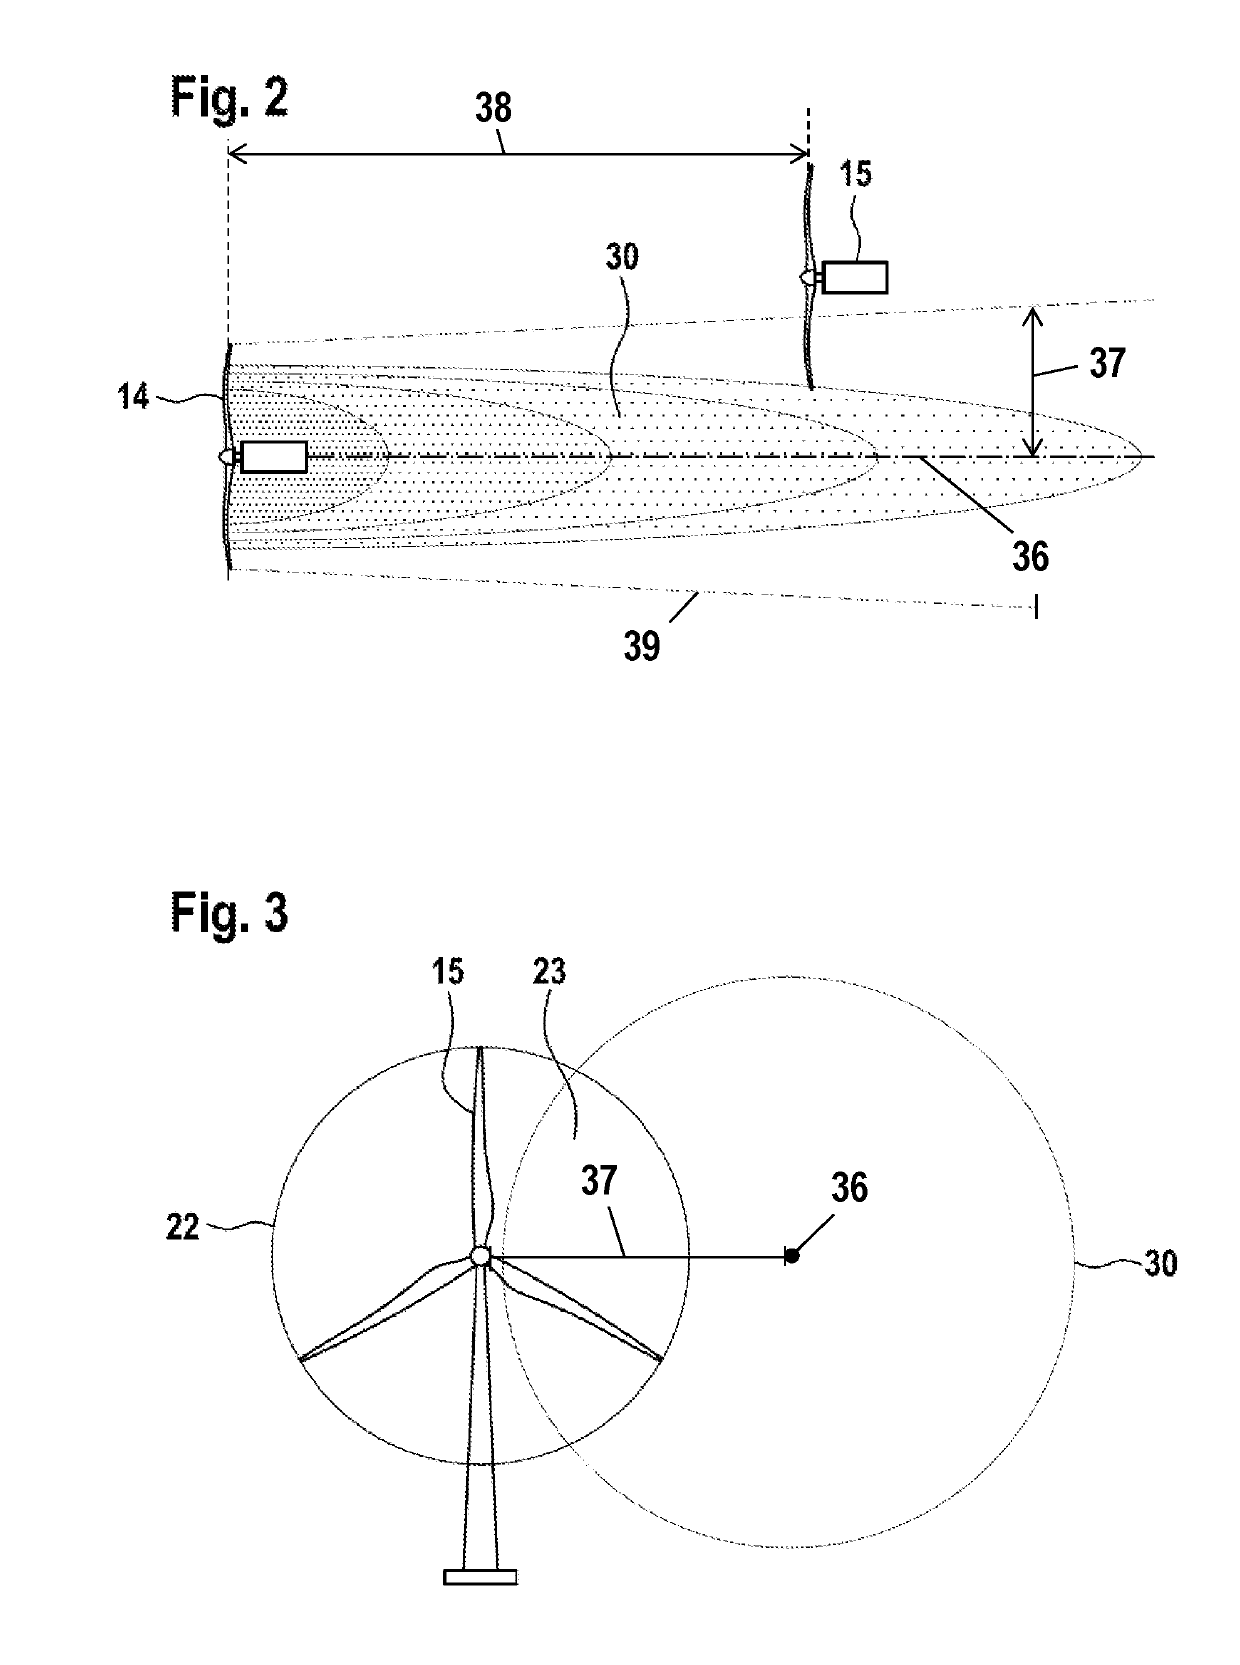 Control System and Method for Operating a Plurality of Wind Turbines